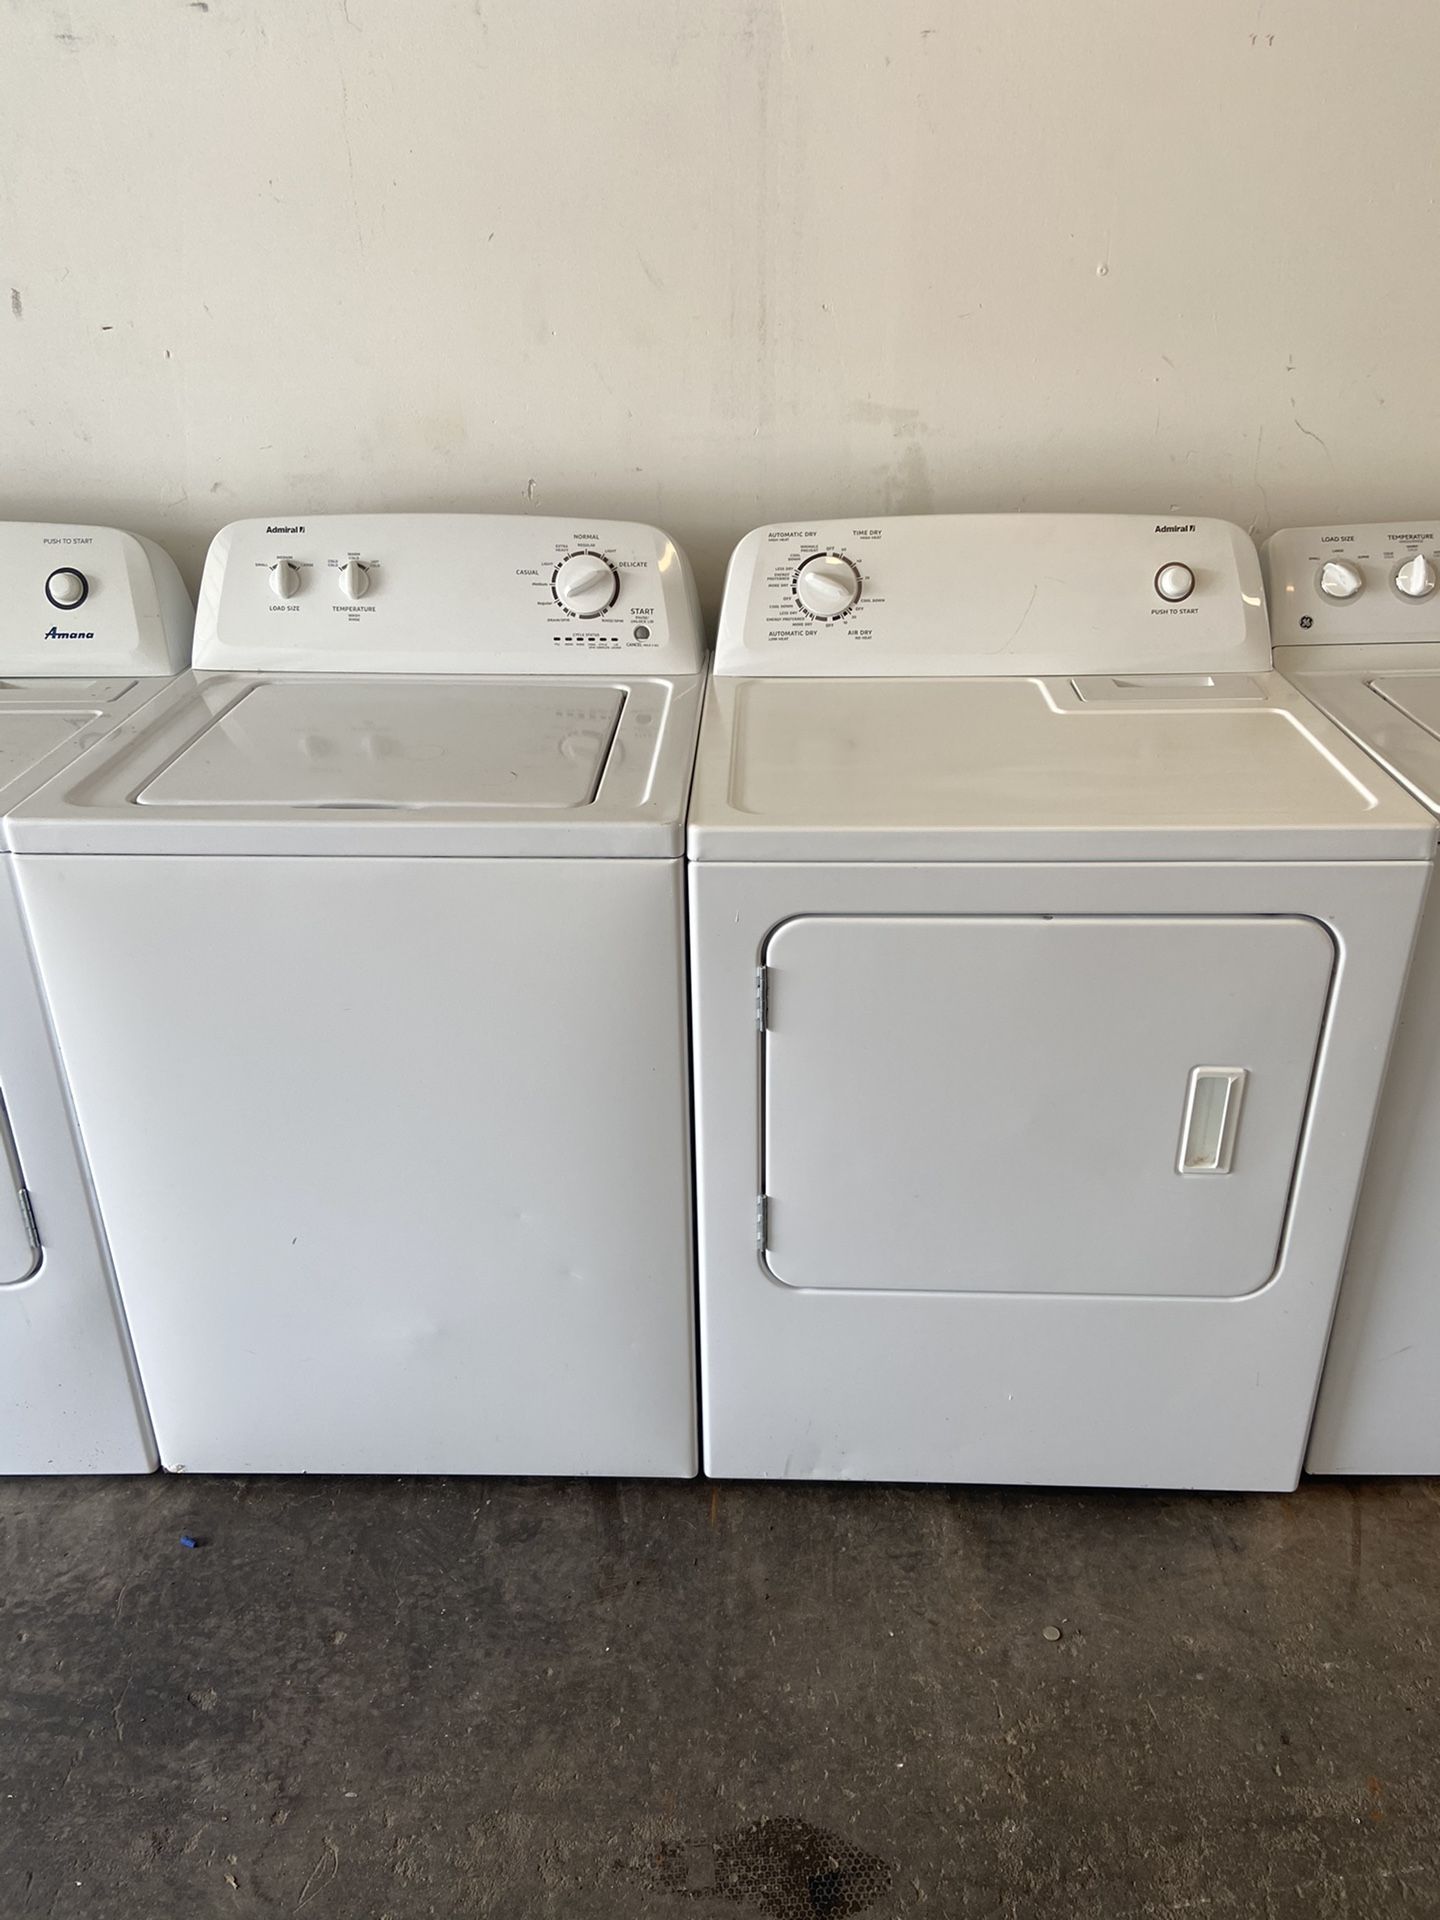 Admiral Washer And Dryer Set